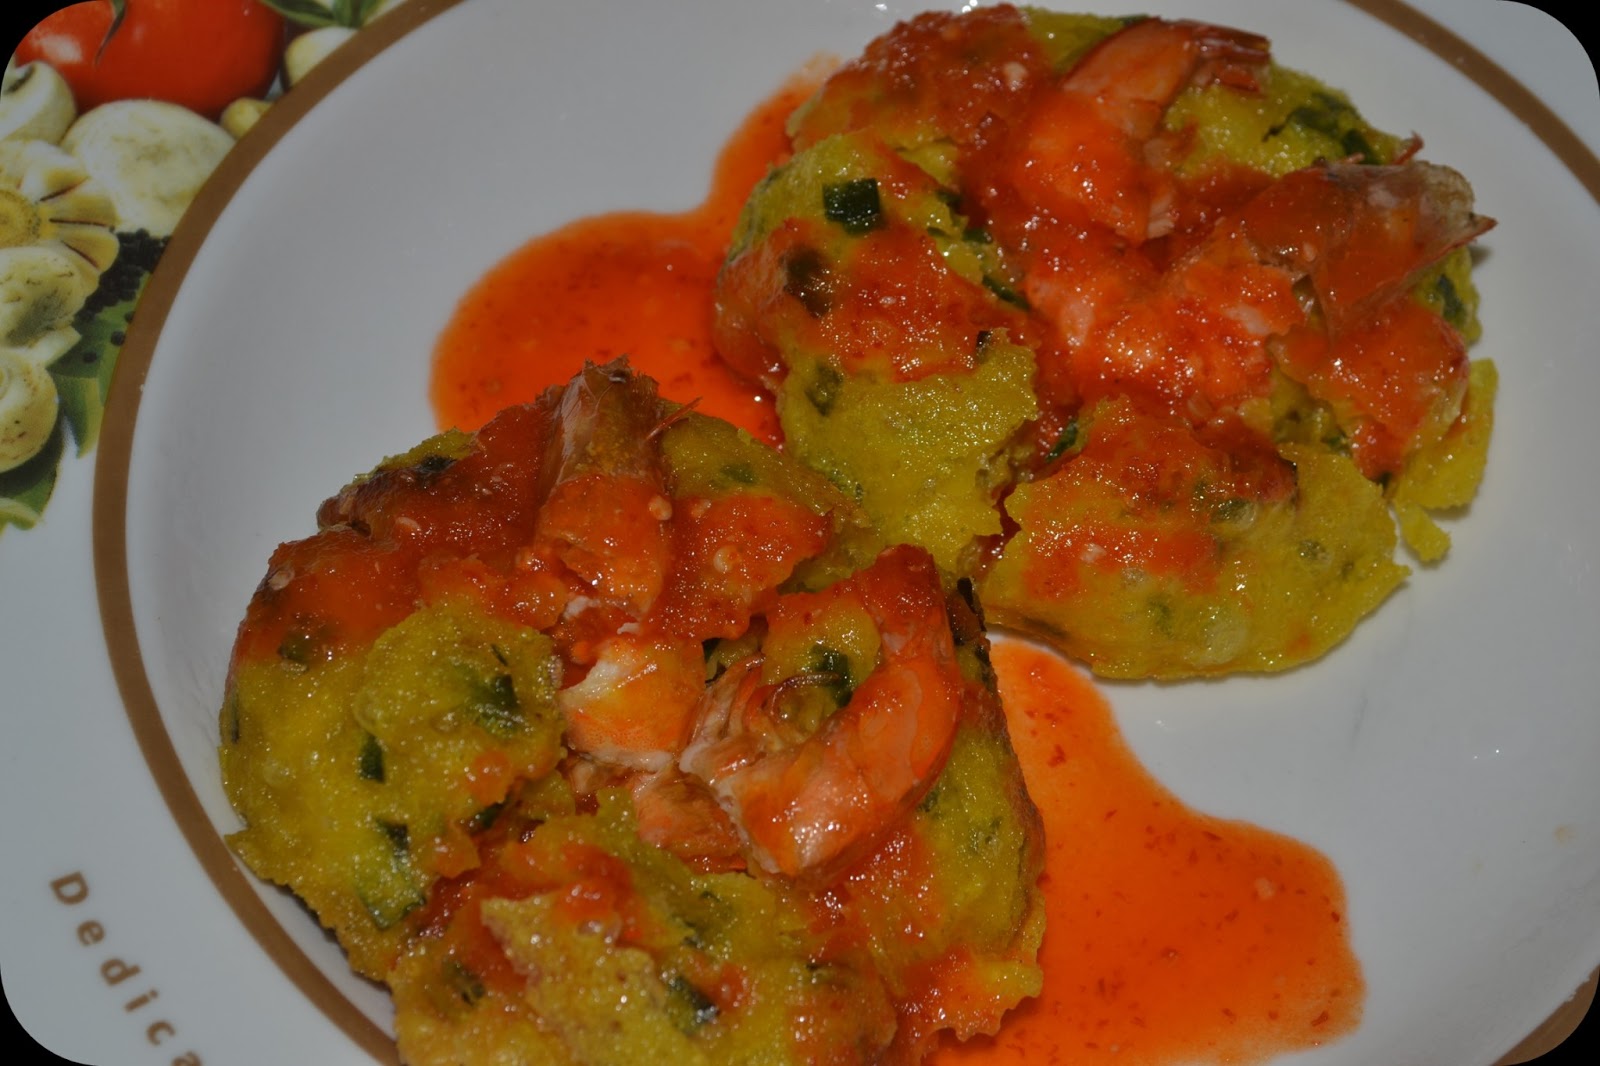 MY ALL: cucur udang homemade